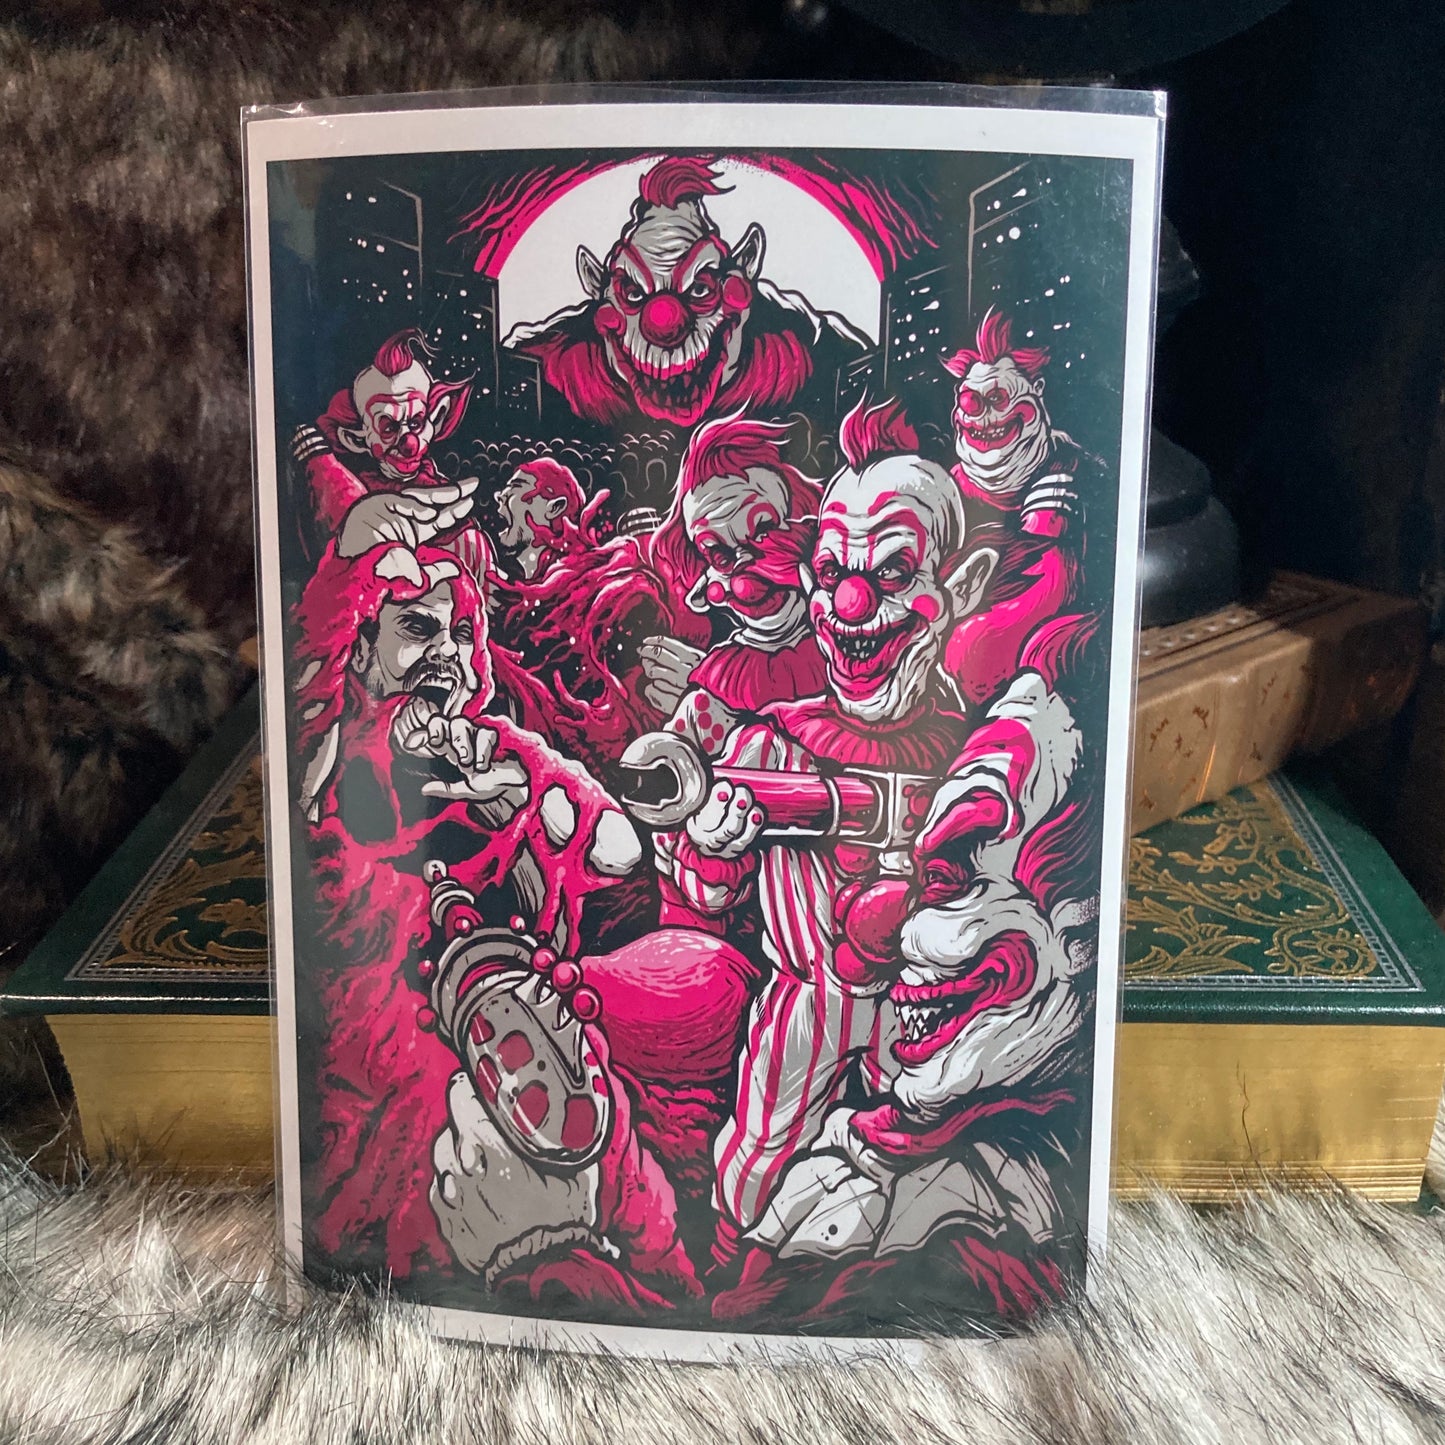 Attack of the Killer Klowns poster / print